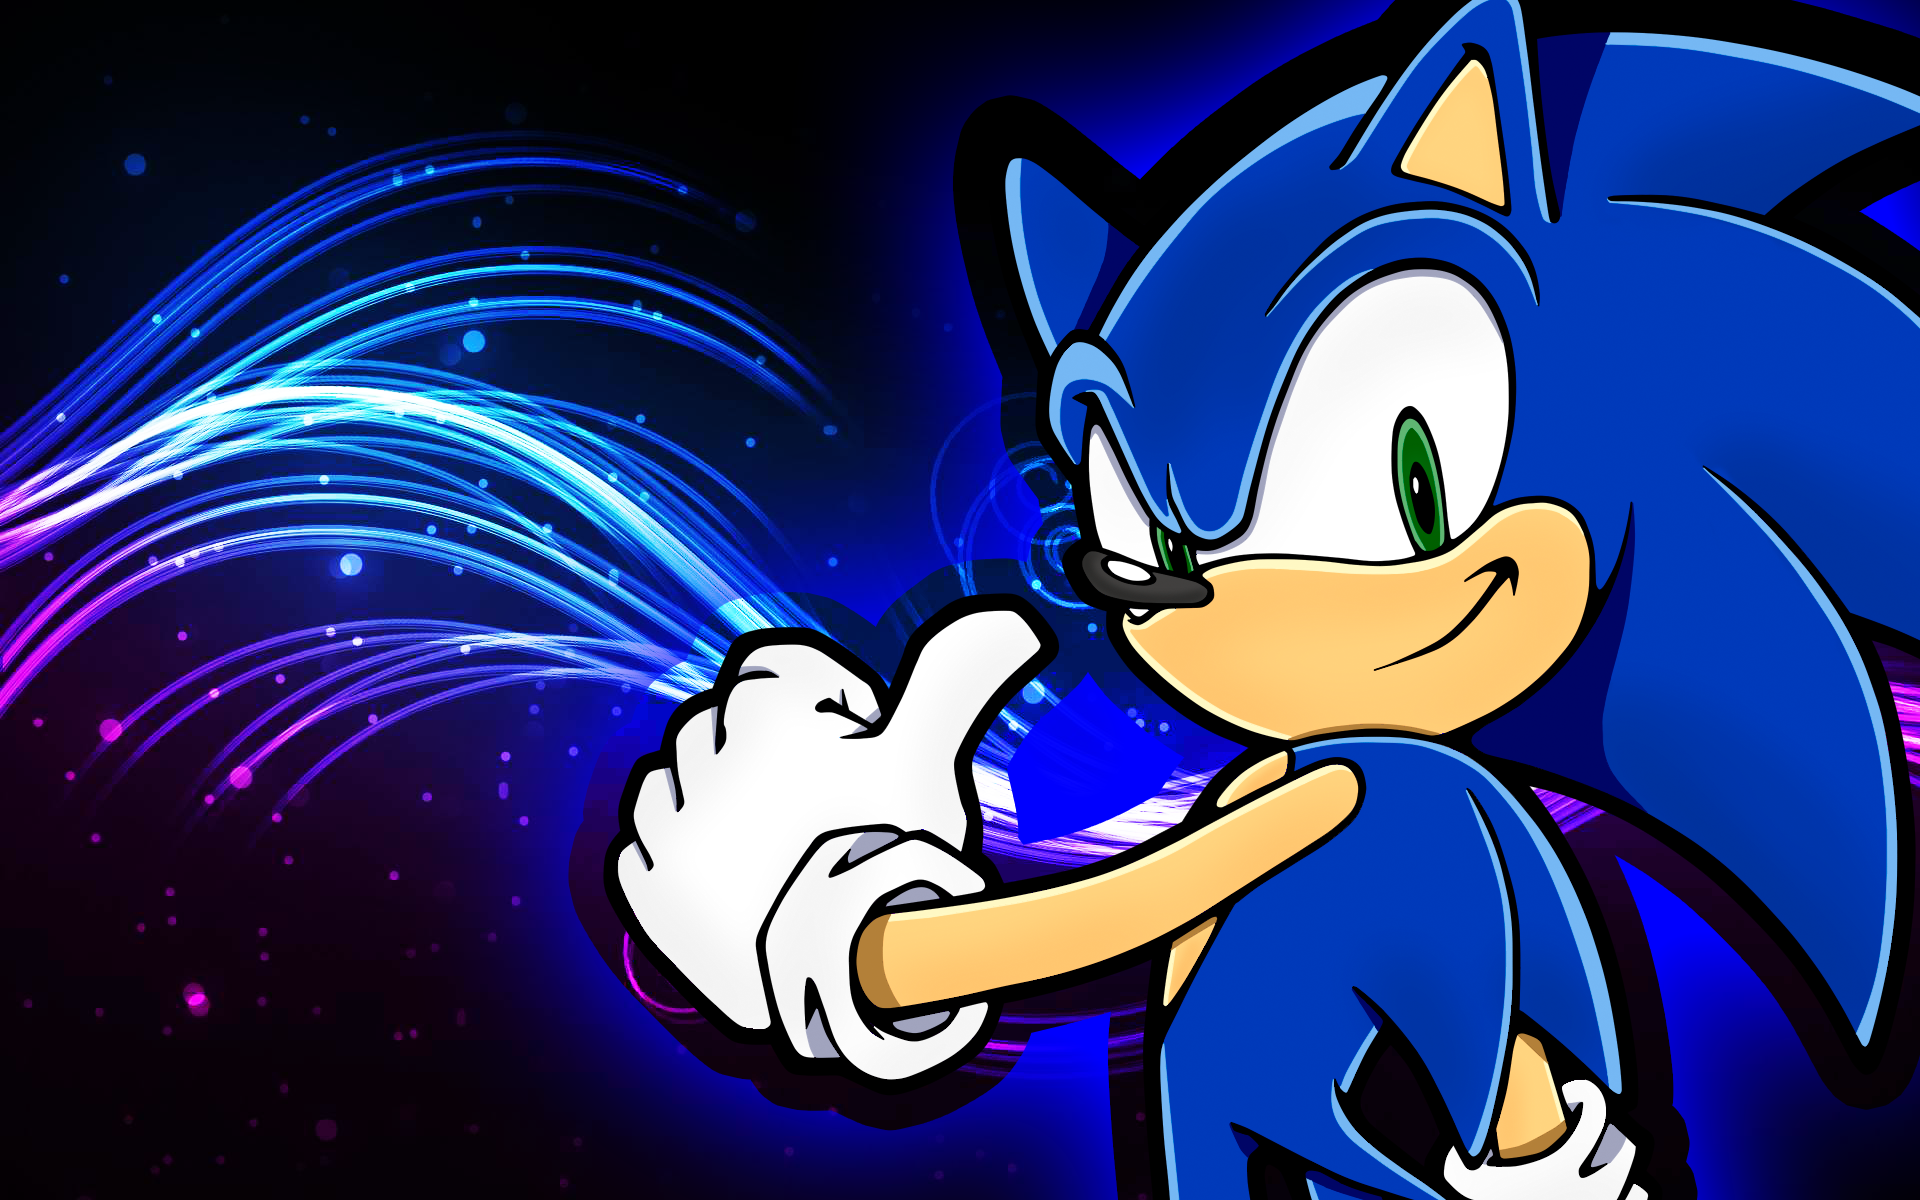 Free Download Sonic Wallpapers 1628 Sonic Wallpapers 1614 Sonic 1374 Sonic 19x10 For Your Desktop Mobile Tablet Explore 49 Sonic Wallpaper Download Sonic The Hedgehog Wallpaper Sonic X Wallpaper Sonic Hd Wallpaper